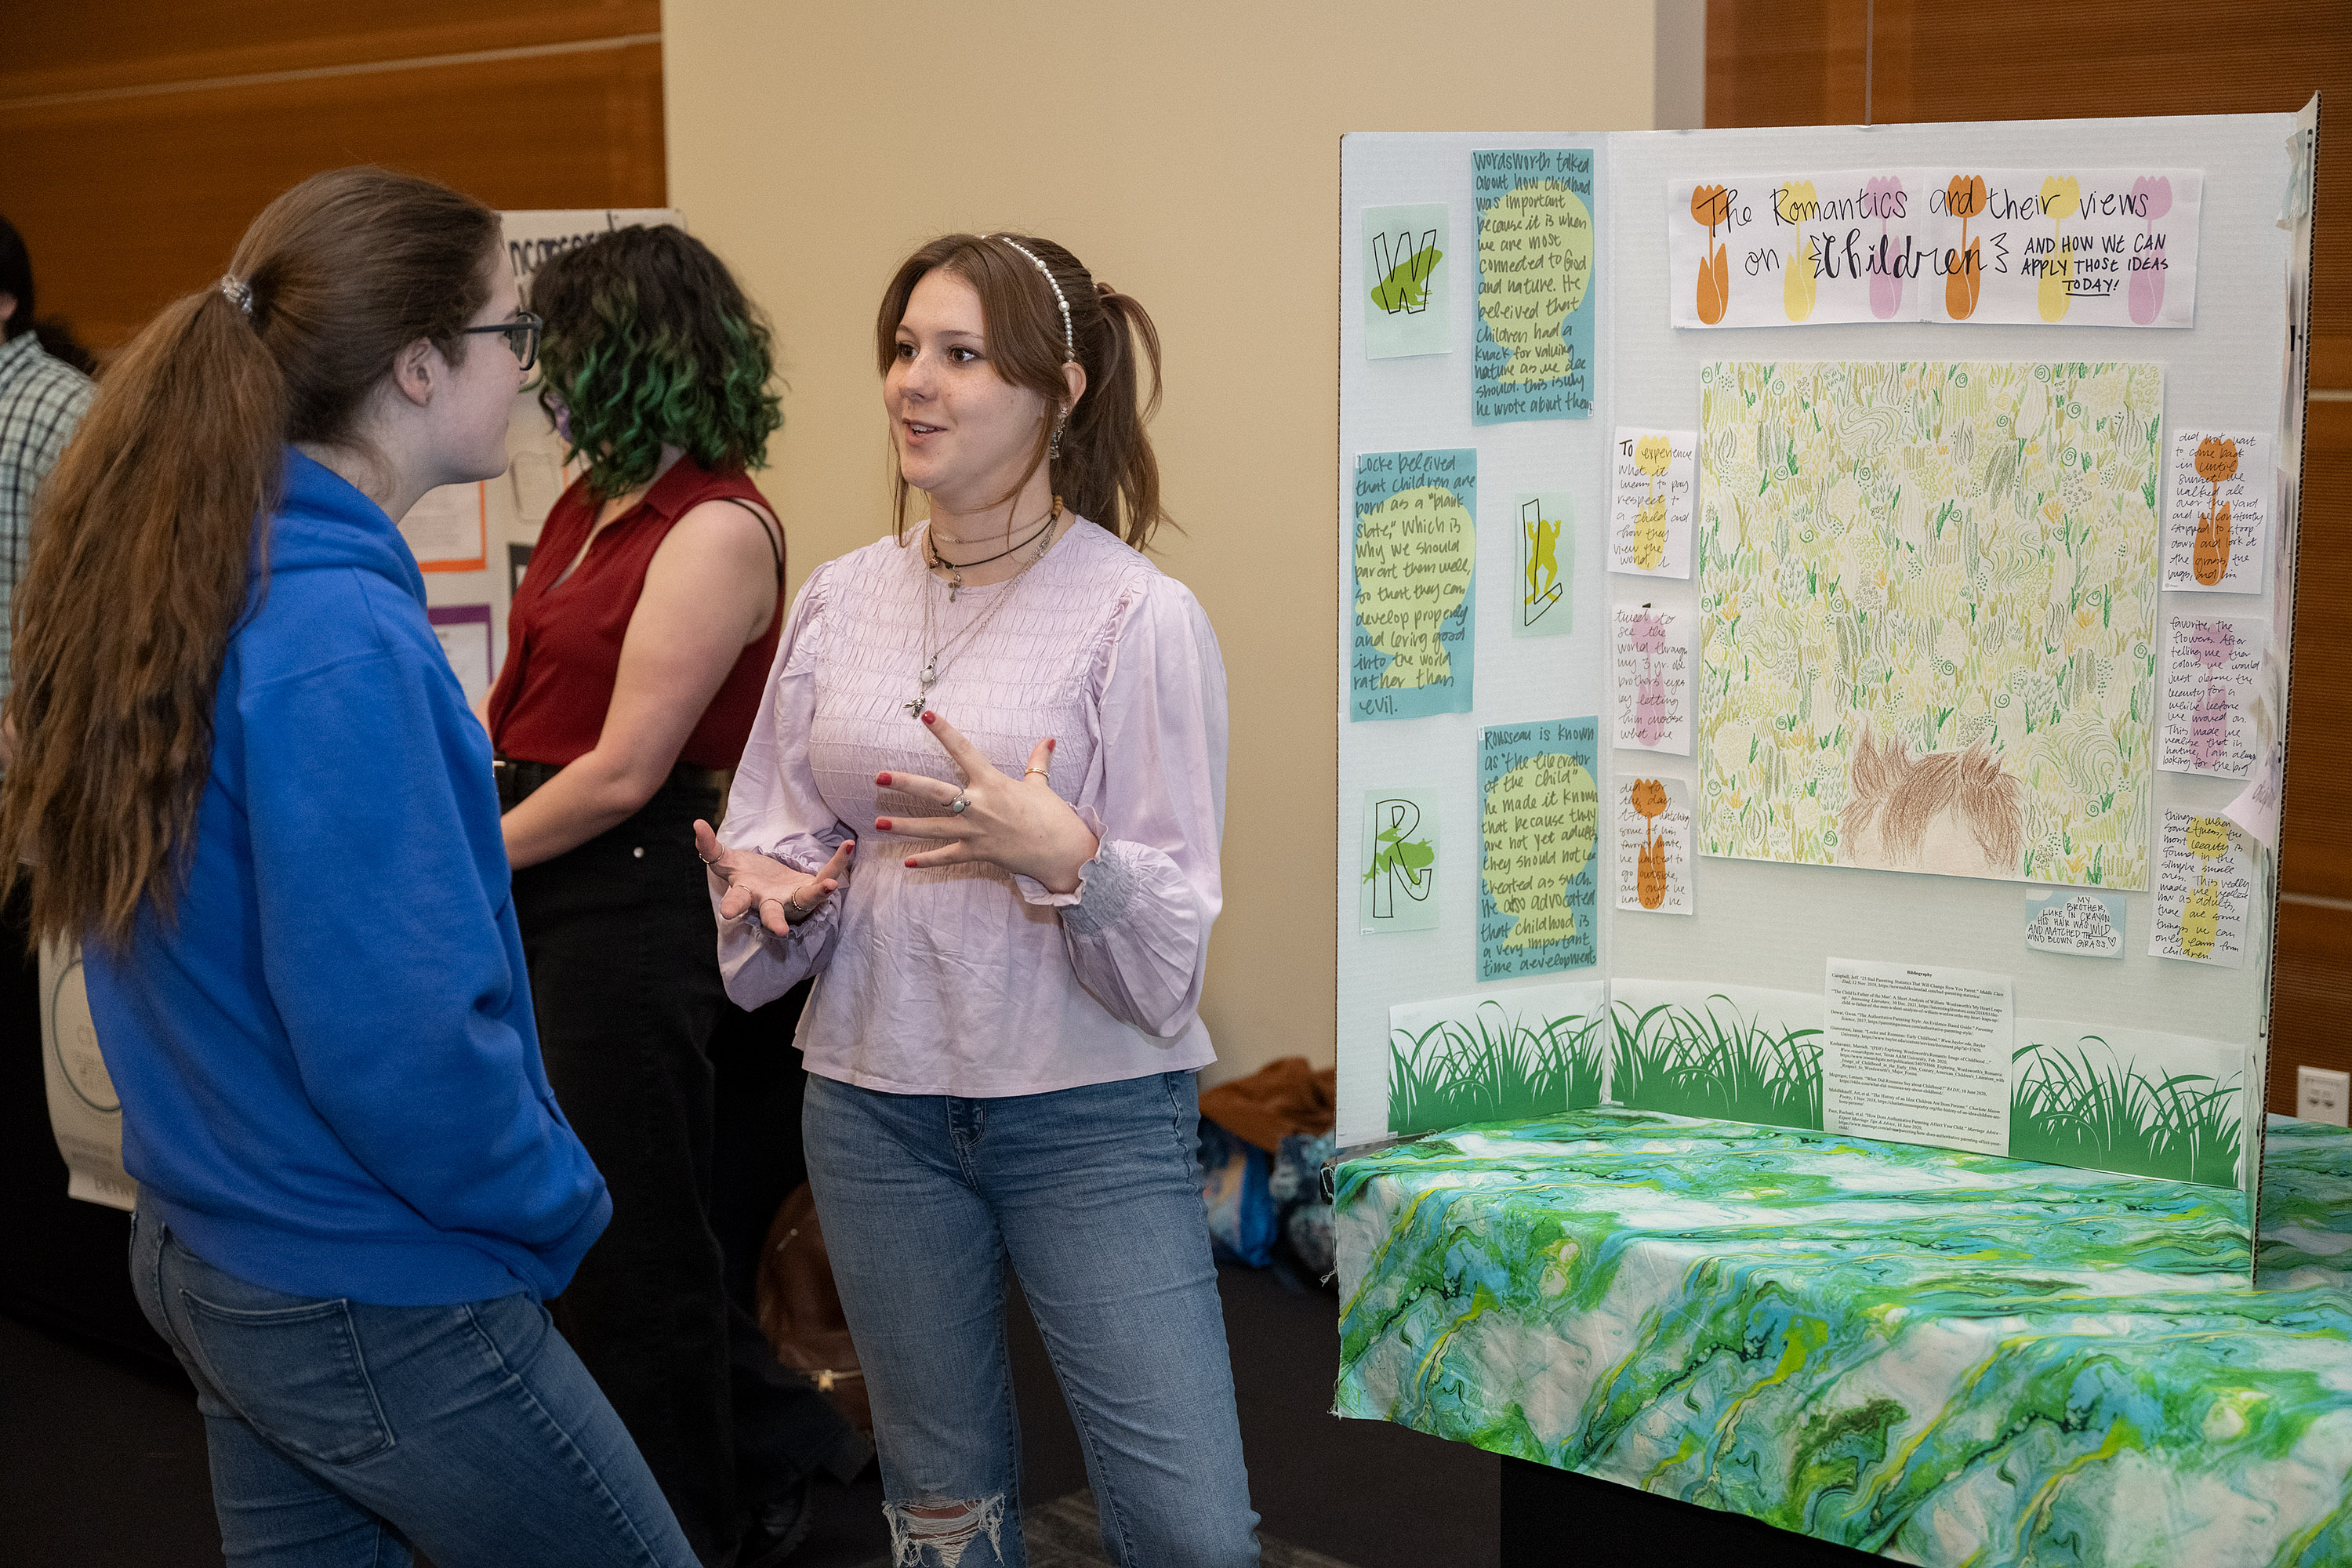 Around 300 undergraduate students are expected to participate in the Middle Tennessee State University English Department’s seventh annual Celebration of Student Writing set for Friday, April 19, in the Student Union Ballroom on MTSU’s campus in Murfreesboro, Tenn. (Photo submitted)